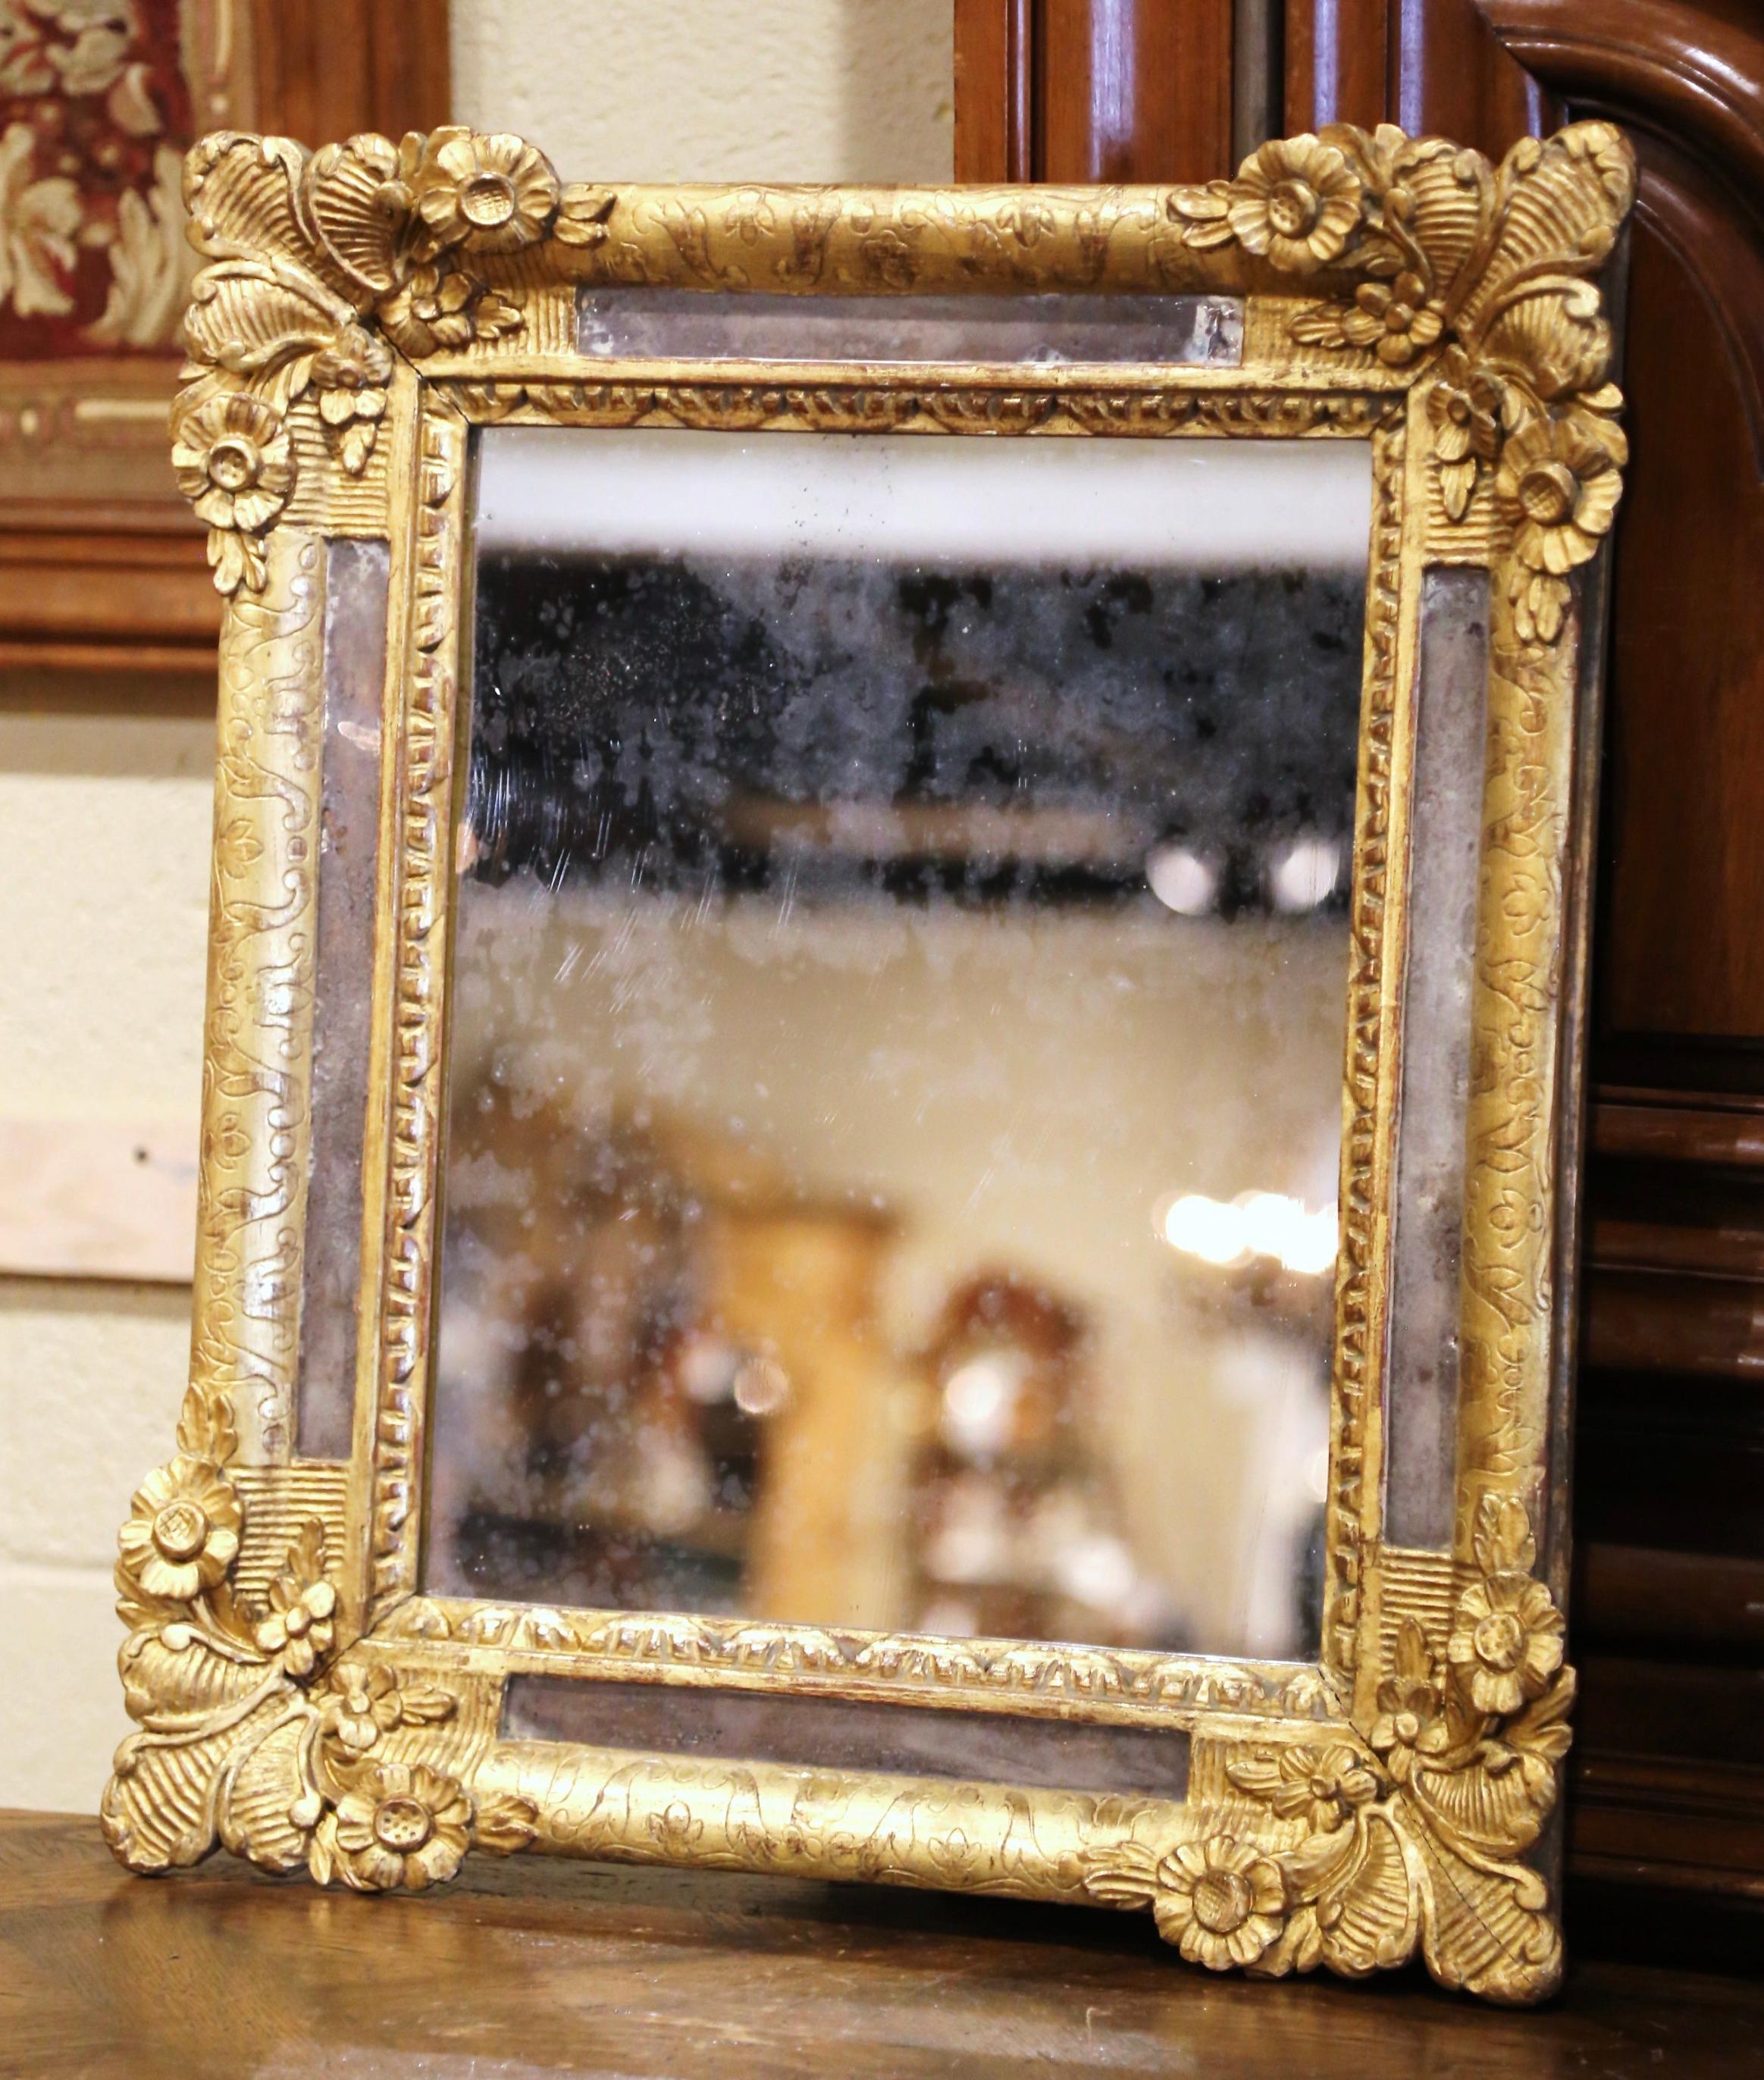 Decorate a powder room or hallway with this elegant antique gilt overlay mirror. Crafted in Provence, Southern France circa 1860, the “Parclose” mirror features nicely carved floral and shell decor in high relief on each corner. The lovely frame is